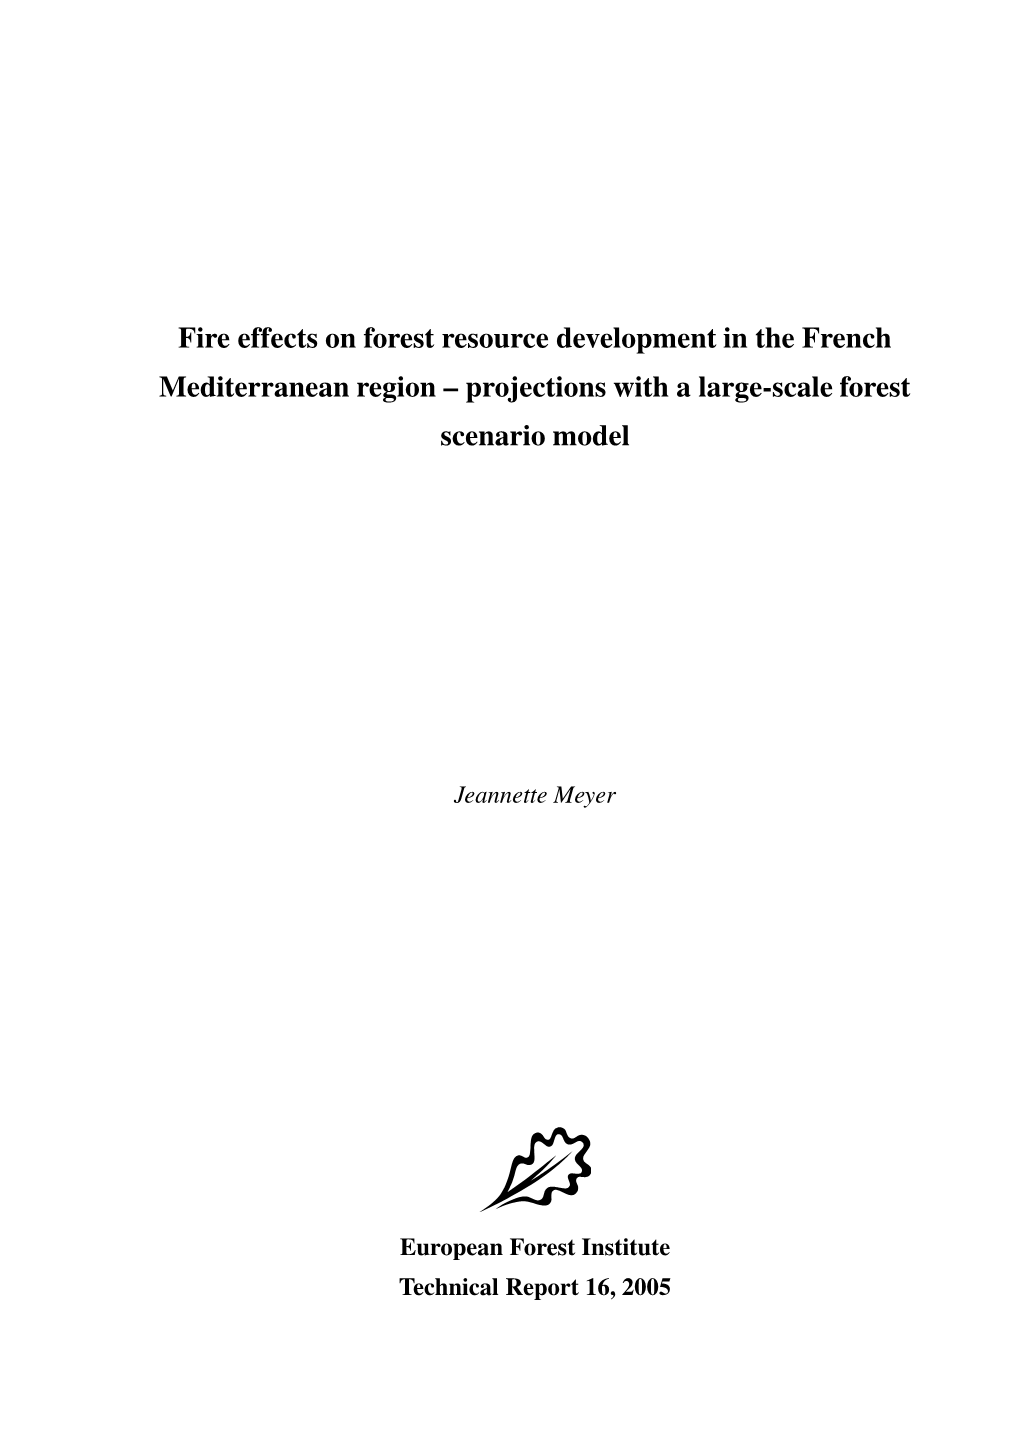 Fire Effects on Forest Resource Development in the French Mediterranean Region – Projections with a Large-Scale Forest Scenario Model